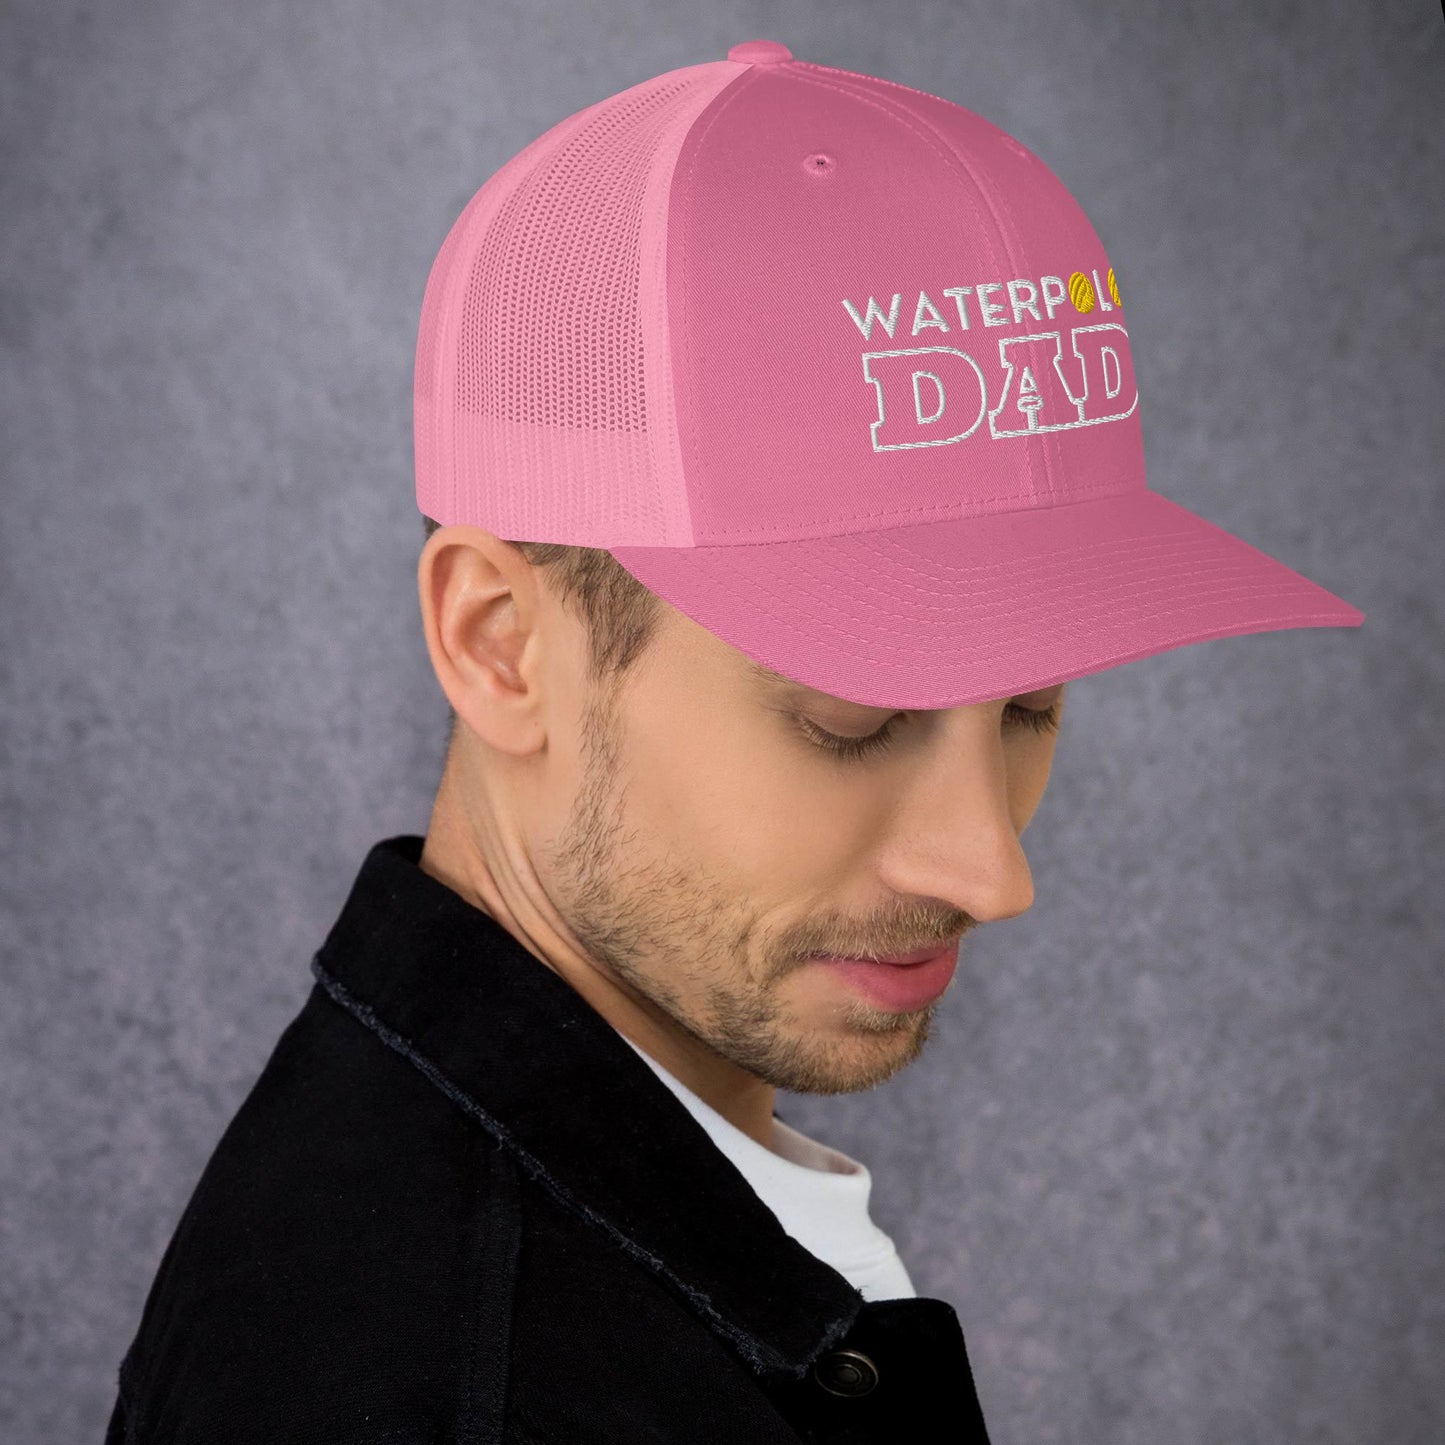 Waterpolo Dad - Embroidered Retro Trucker Hat | Yupoong 6606